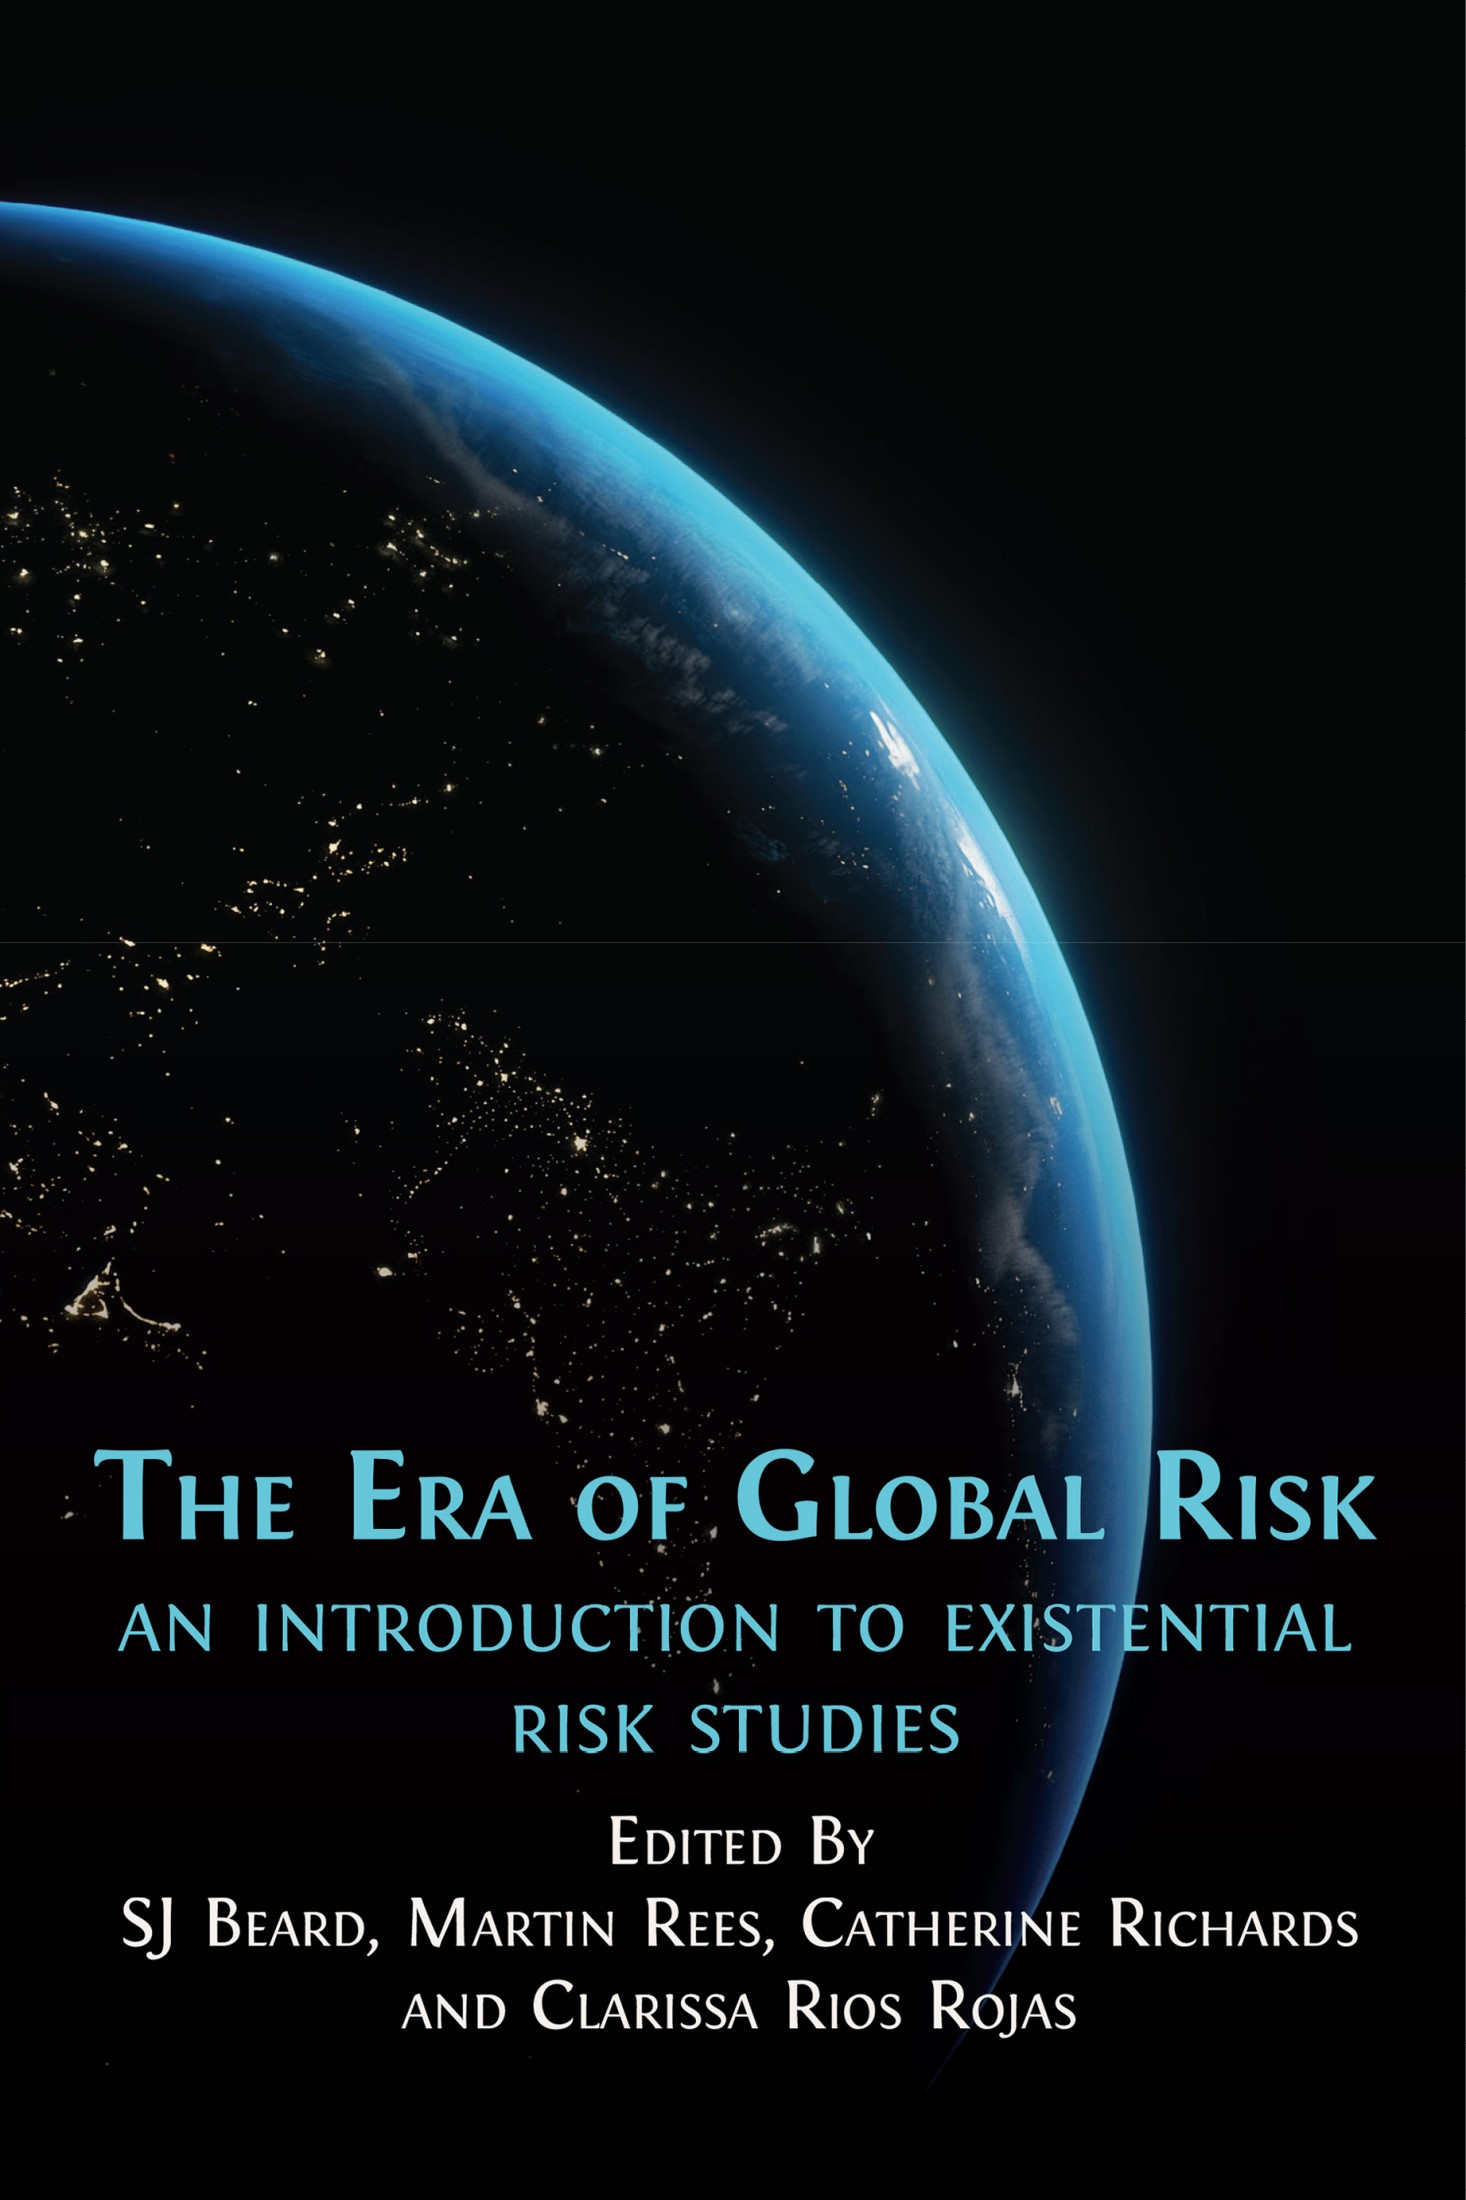 The Era of Global Risk book cover image